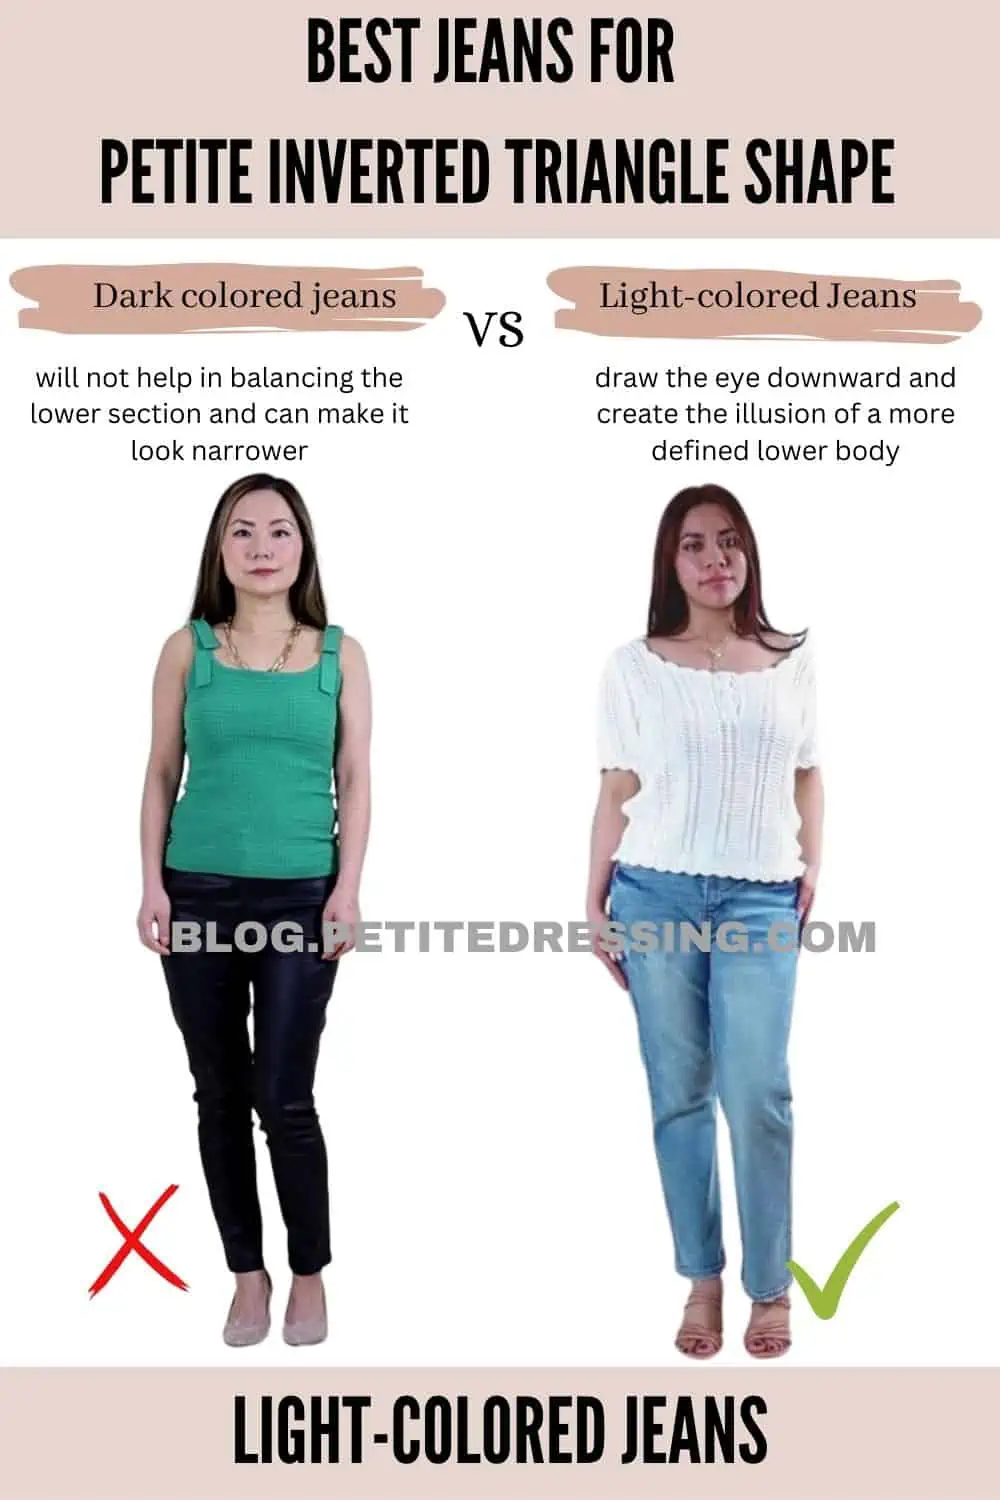 Jeans Style Guide for Petite Inverted Triangle Shape - Petite Dressing